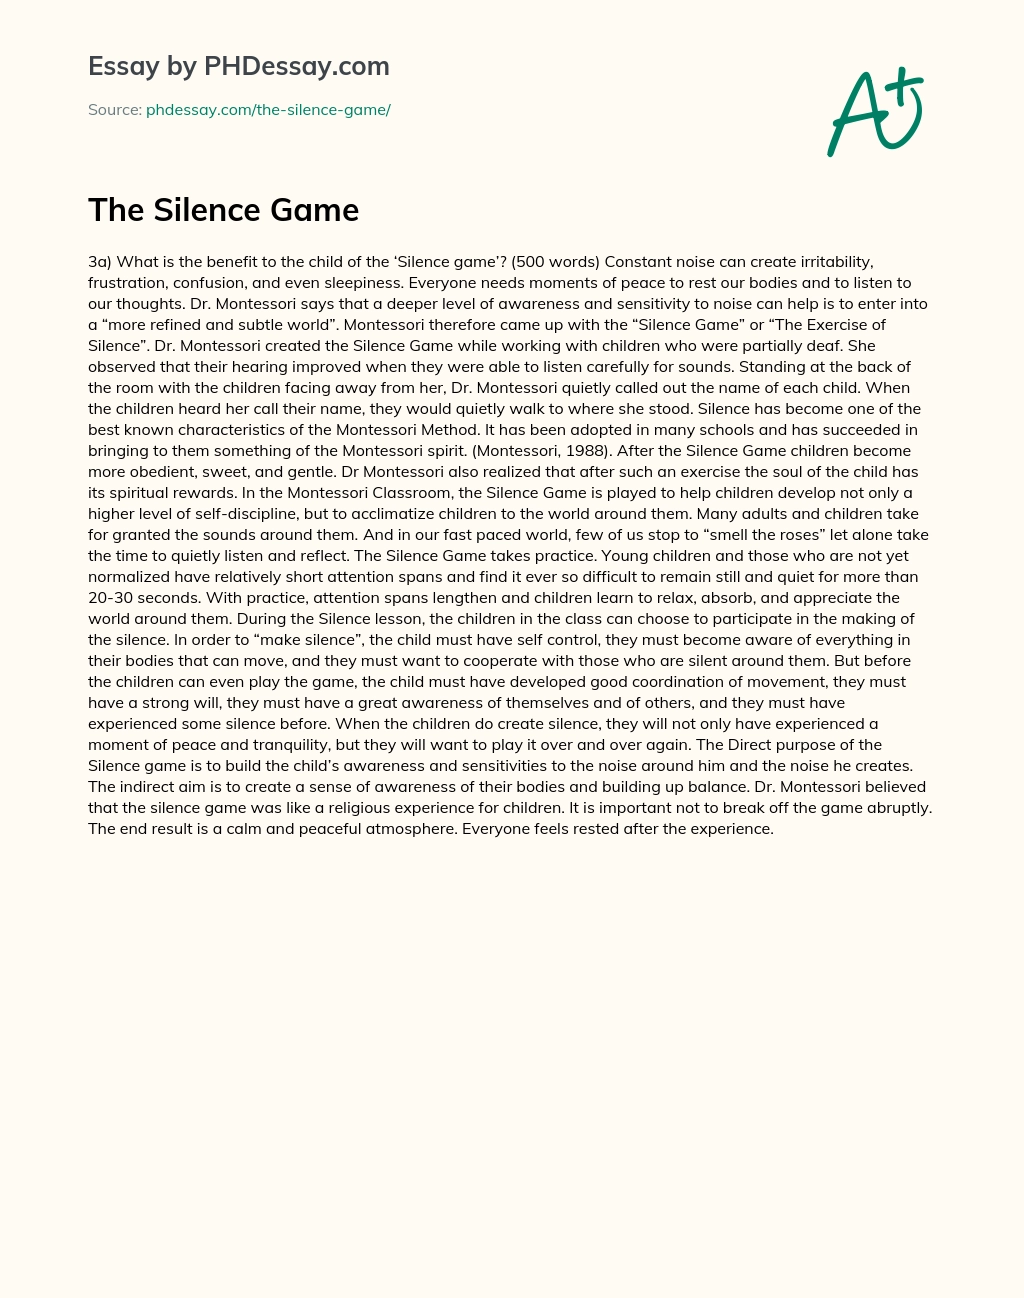 The Silence Game essay